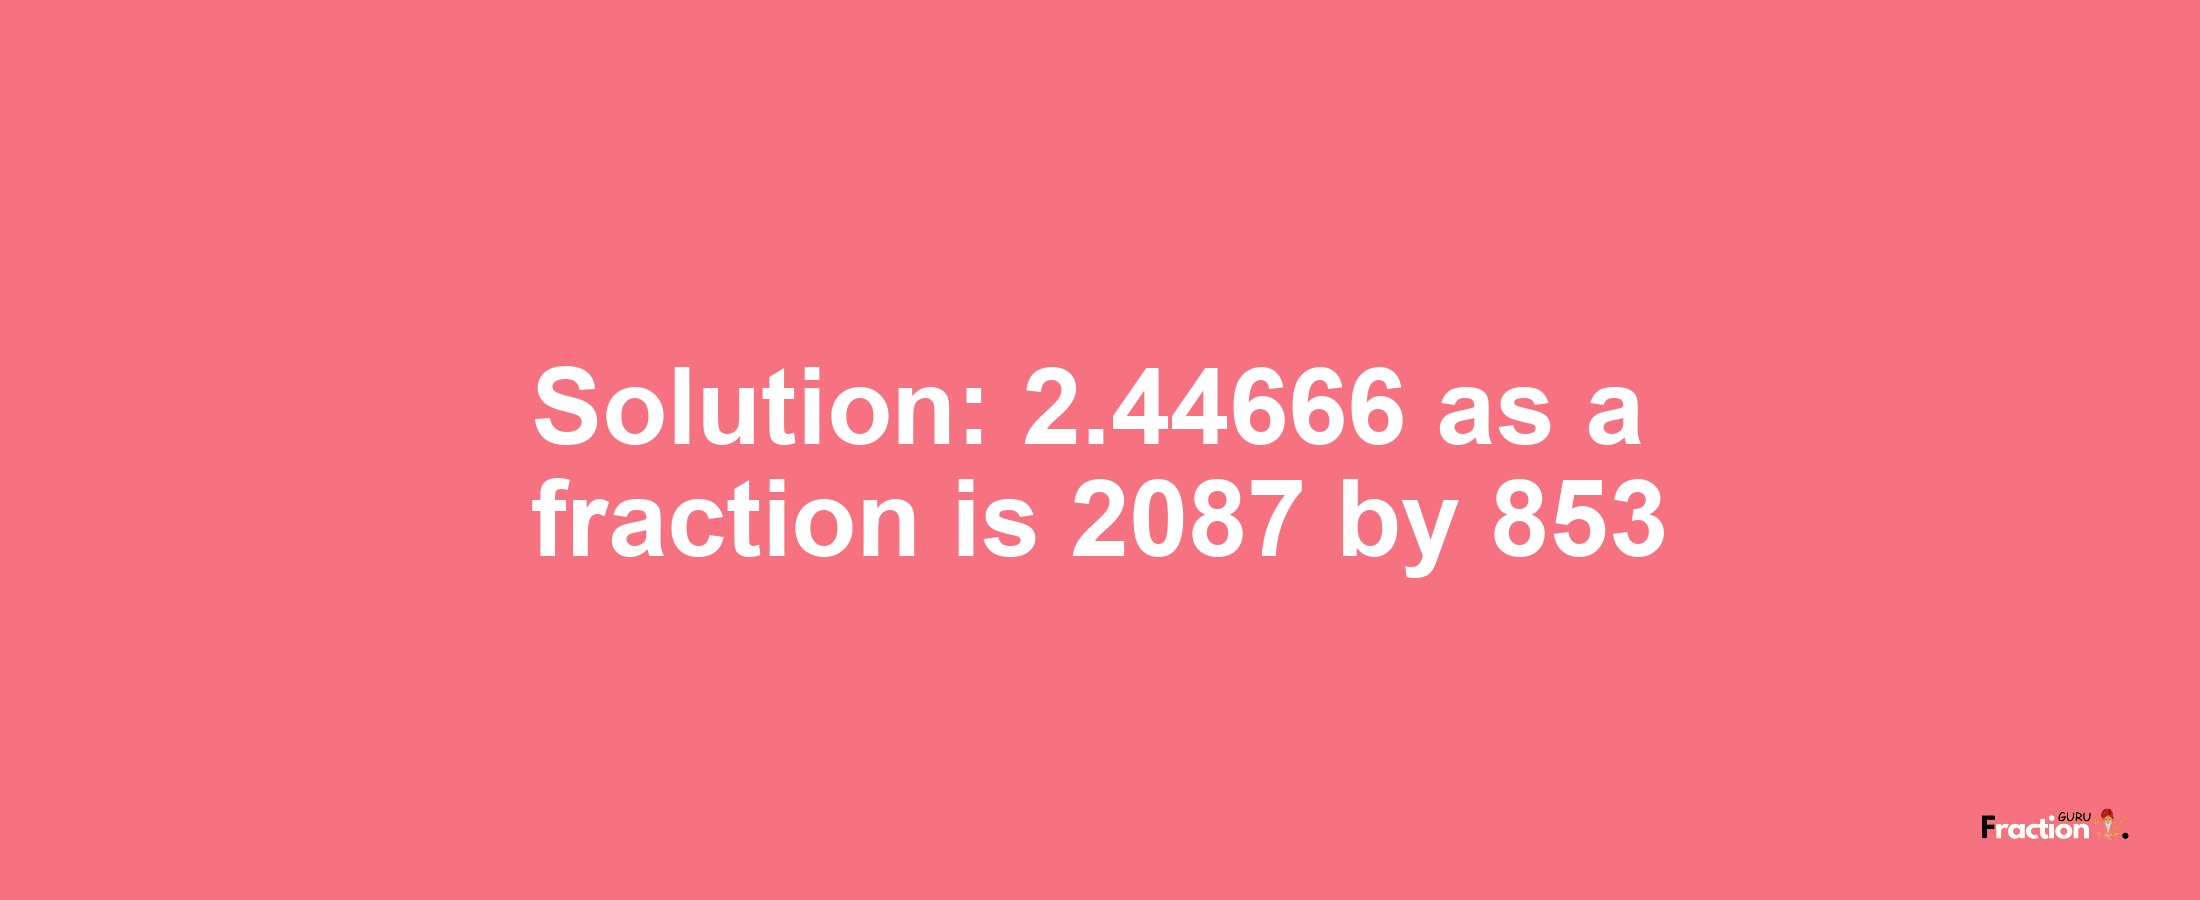 Solution:2.44666 as a fraction is 2087/853